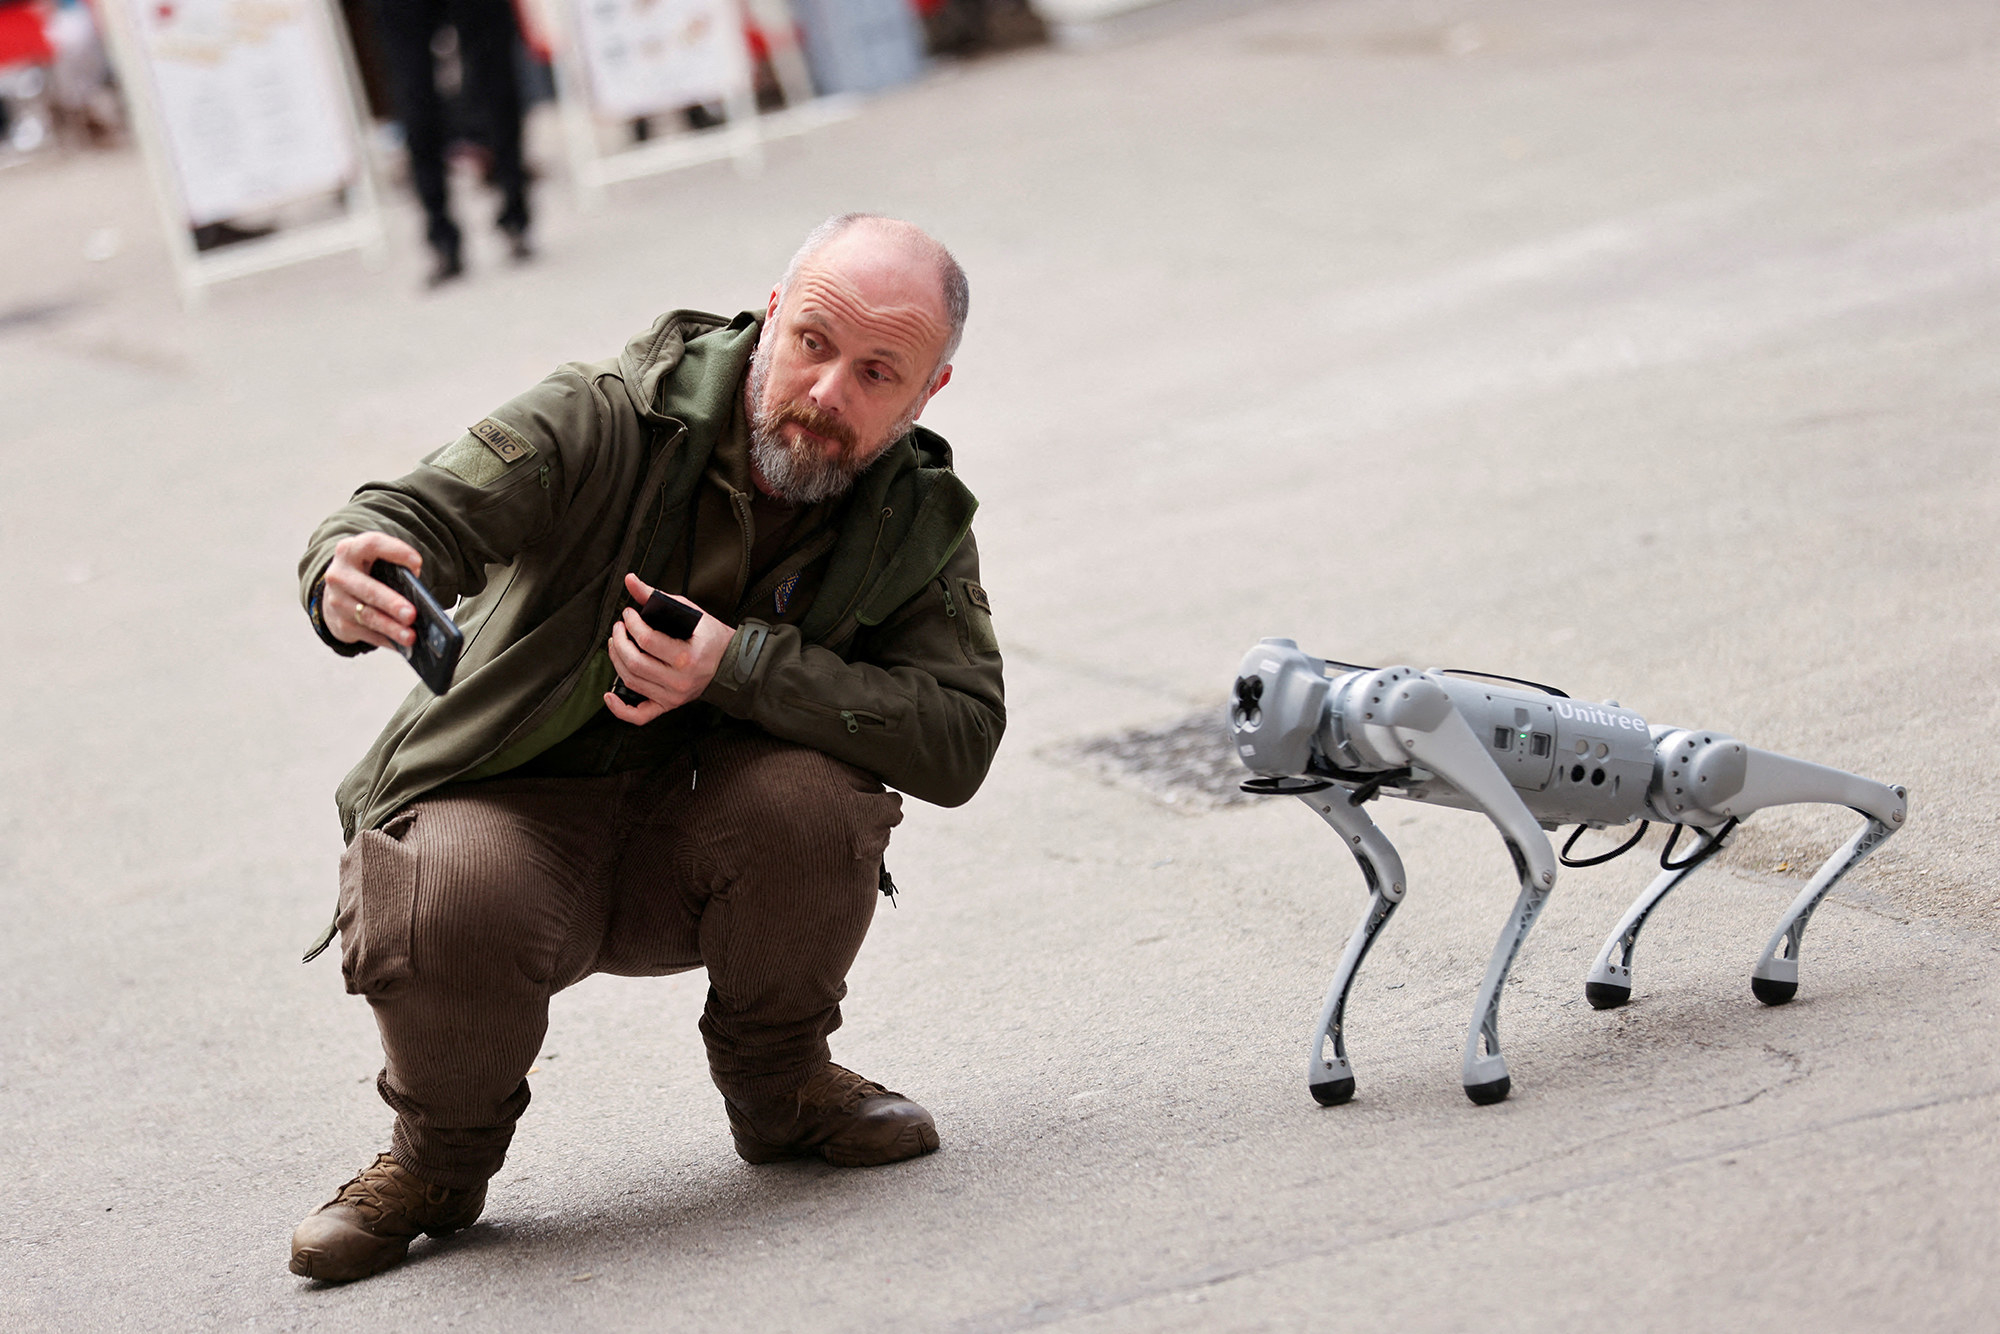 A kneeling man takes a selfie with a cellphone next to a four-legged robotic dog